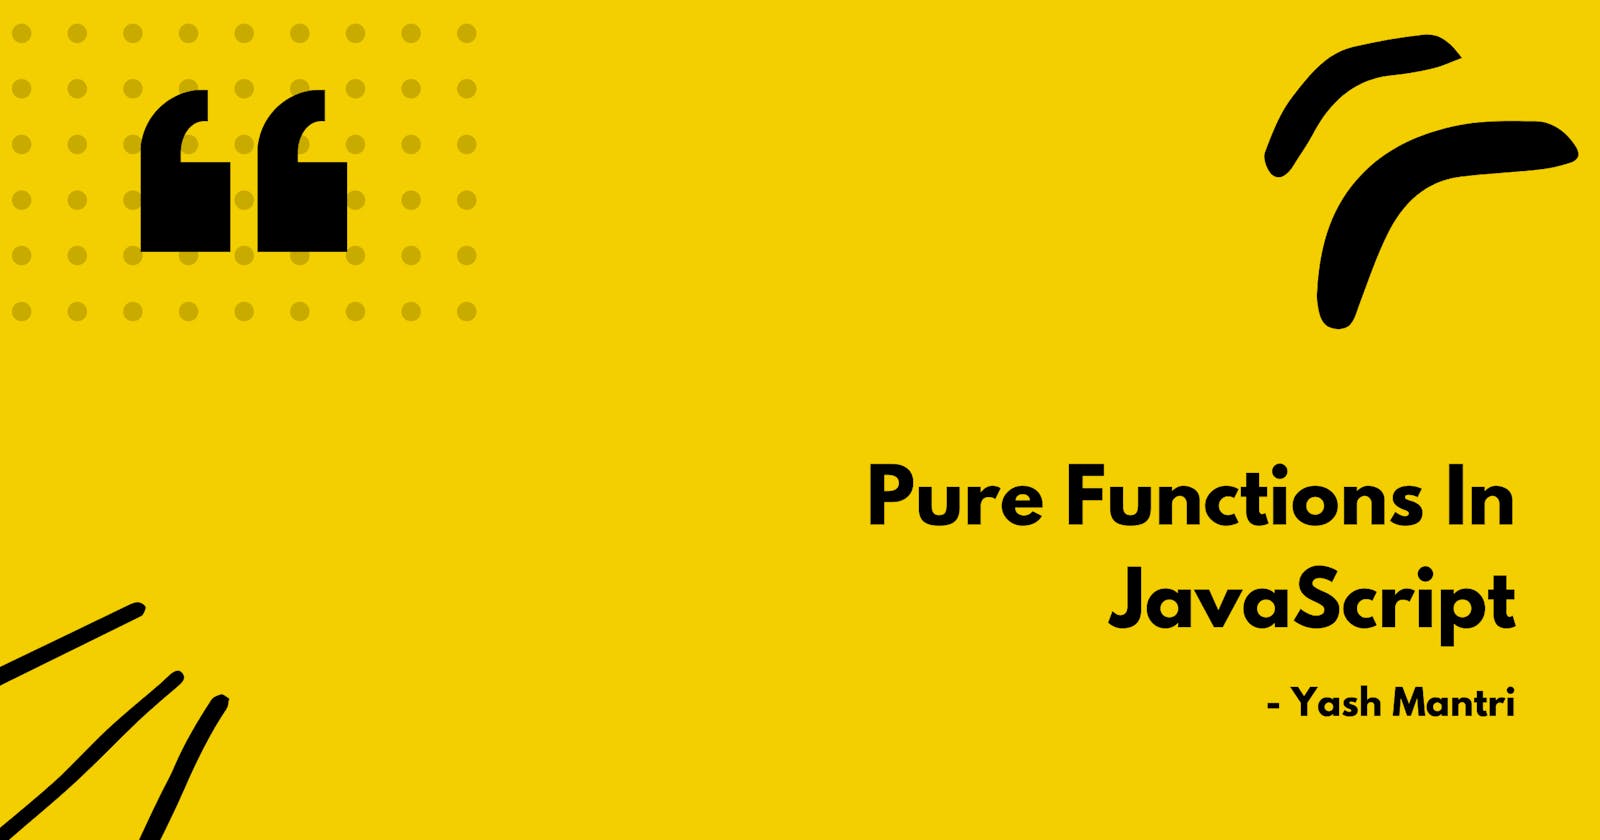 Pure Functions In JavaScript